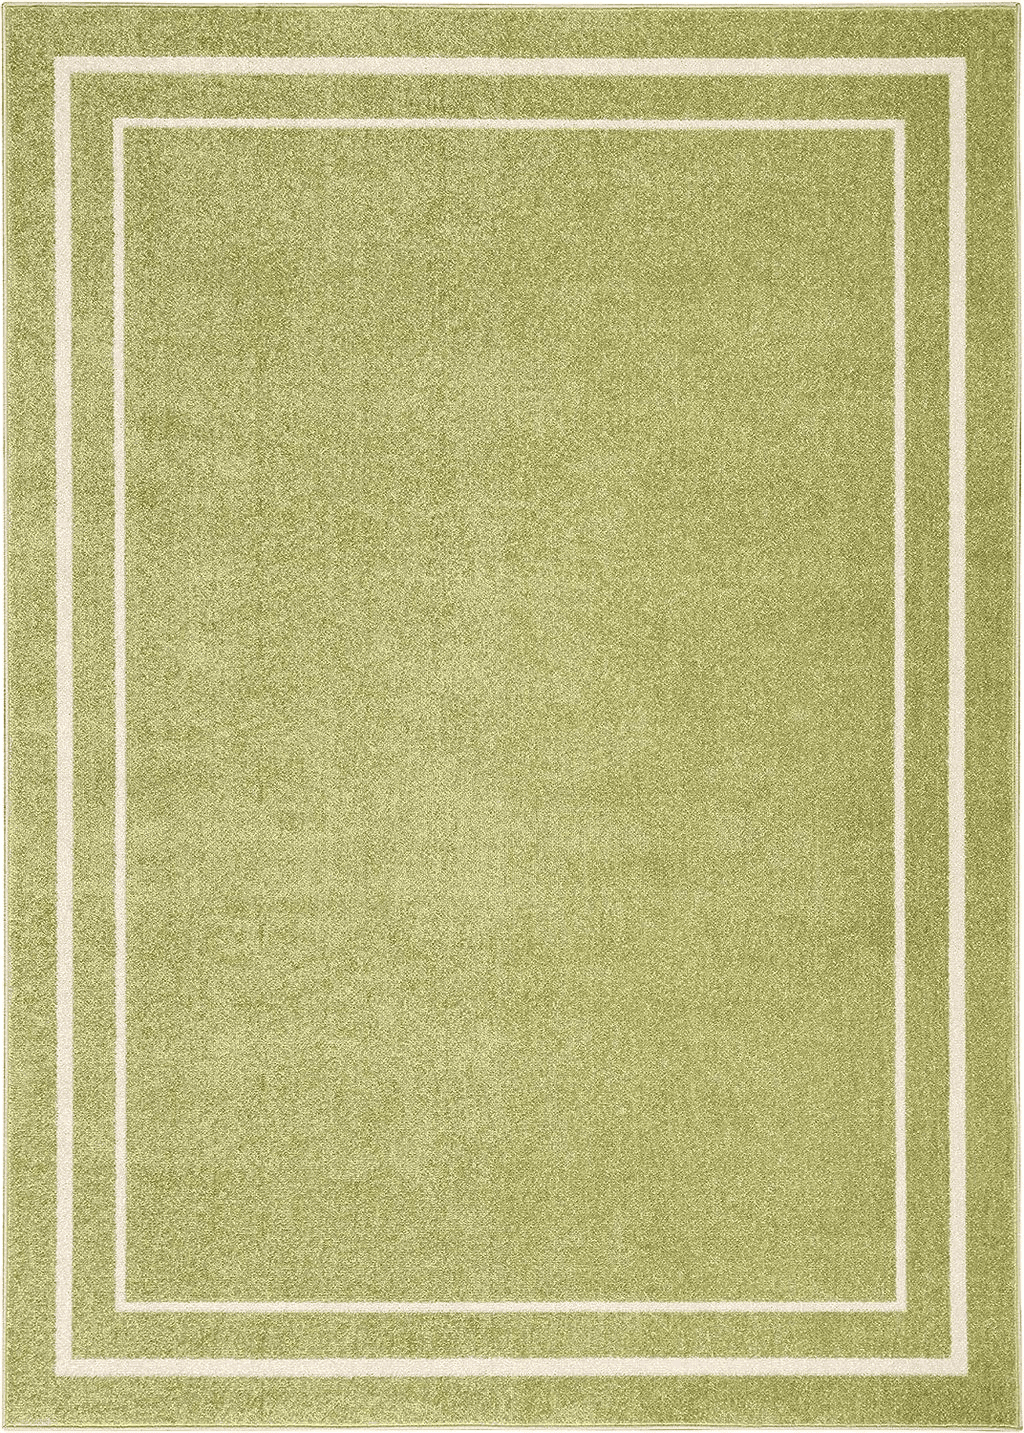 Nourison Essentials Indoor/Outdoor Green Ivory 6' x 9' Area -Rug, Easy -Cleaning, Non Shedding, Bed Room, Living Room, Dining Room, Backyard, Deck, Patio (6x9)